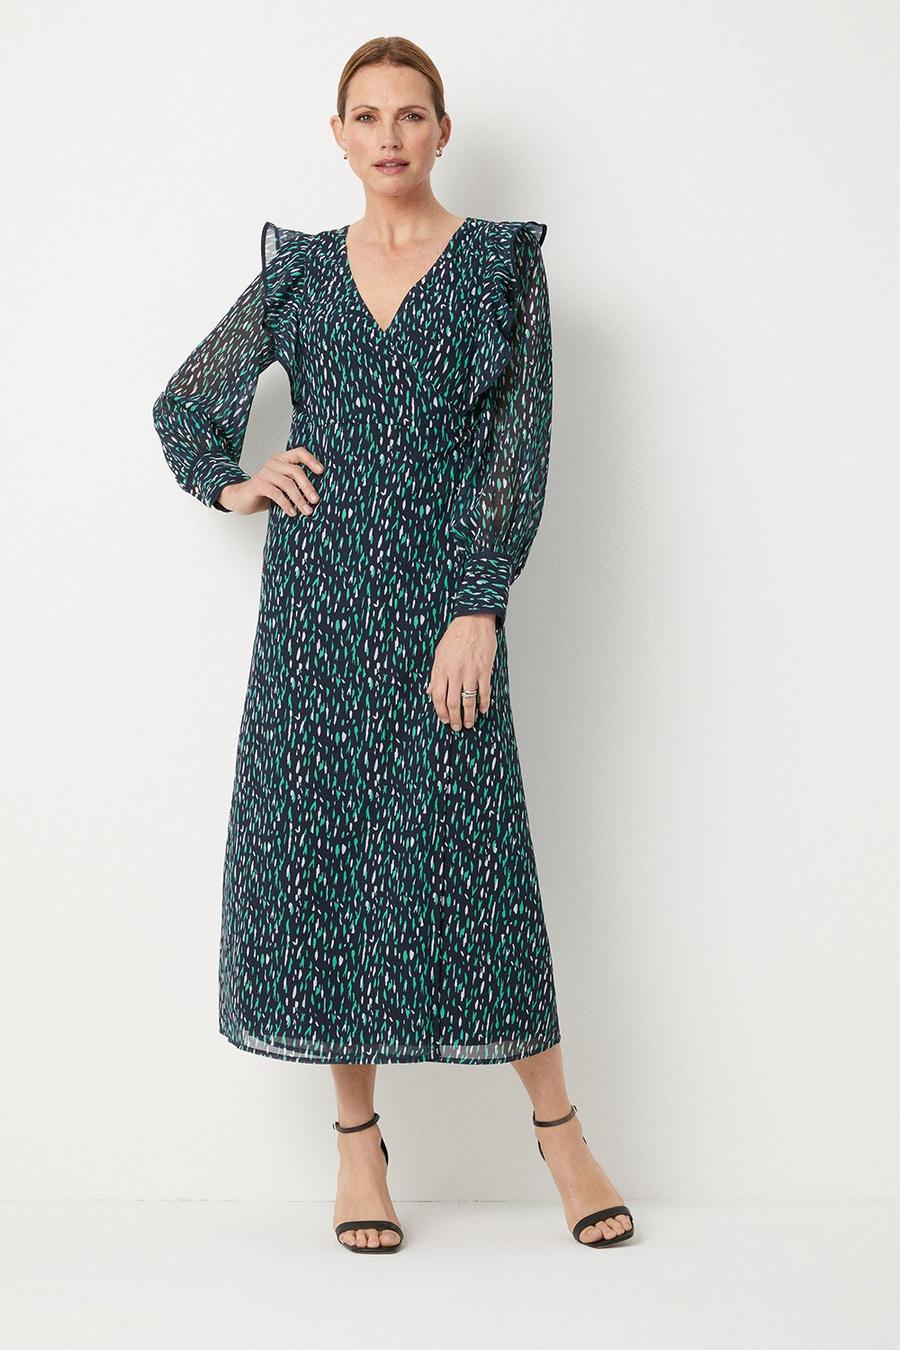 Green And Navy Wrap Dress